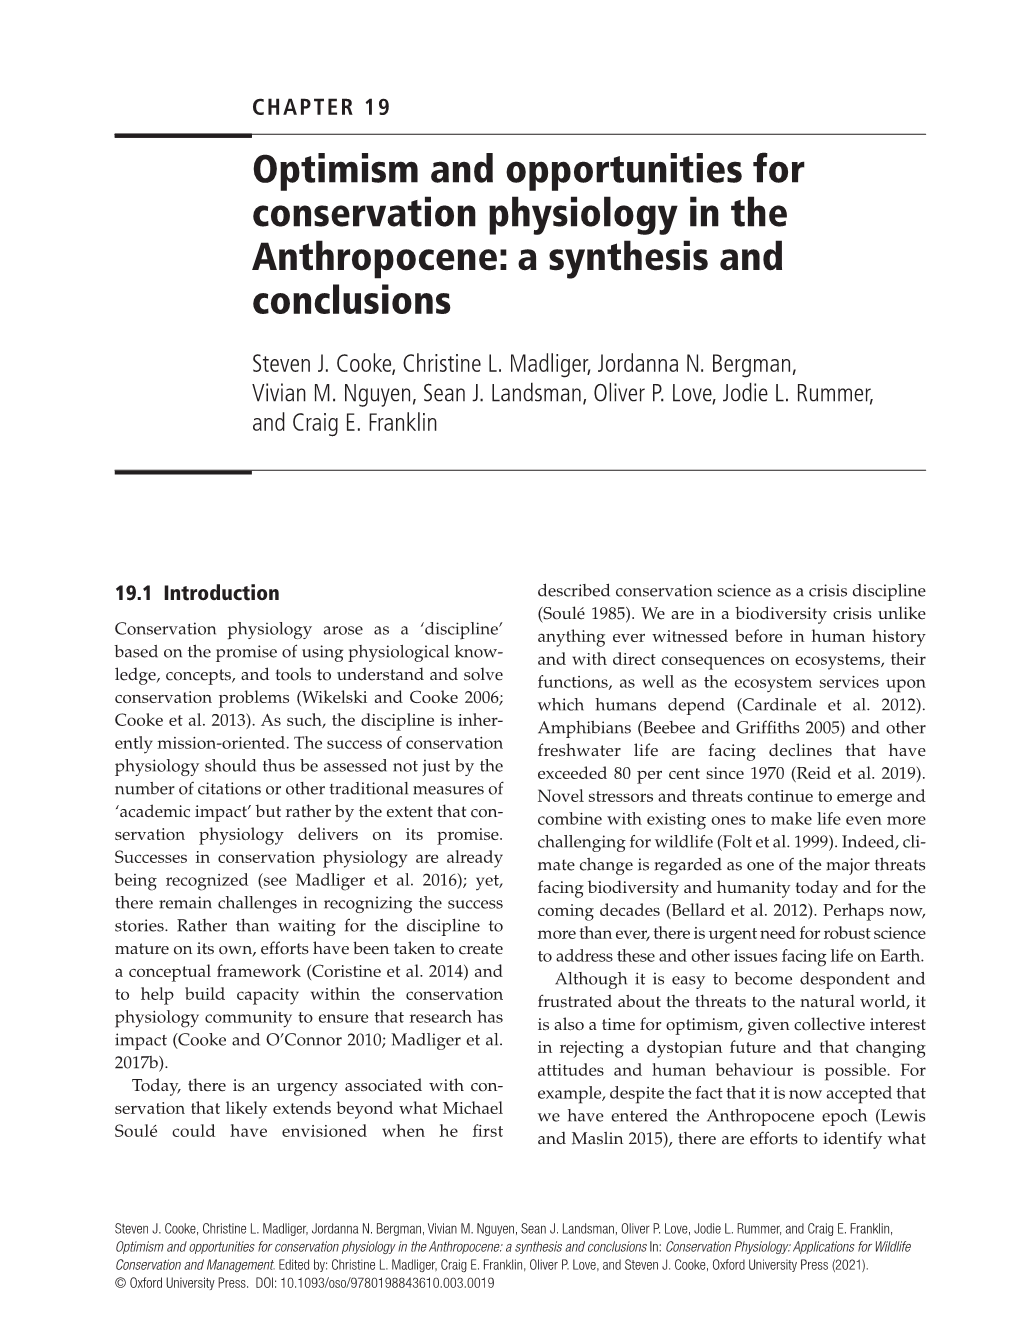 Optimism and Opportunities for Conservation Physiology in the Anthropocene: a Synthesis and Conclusions